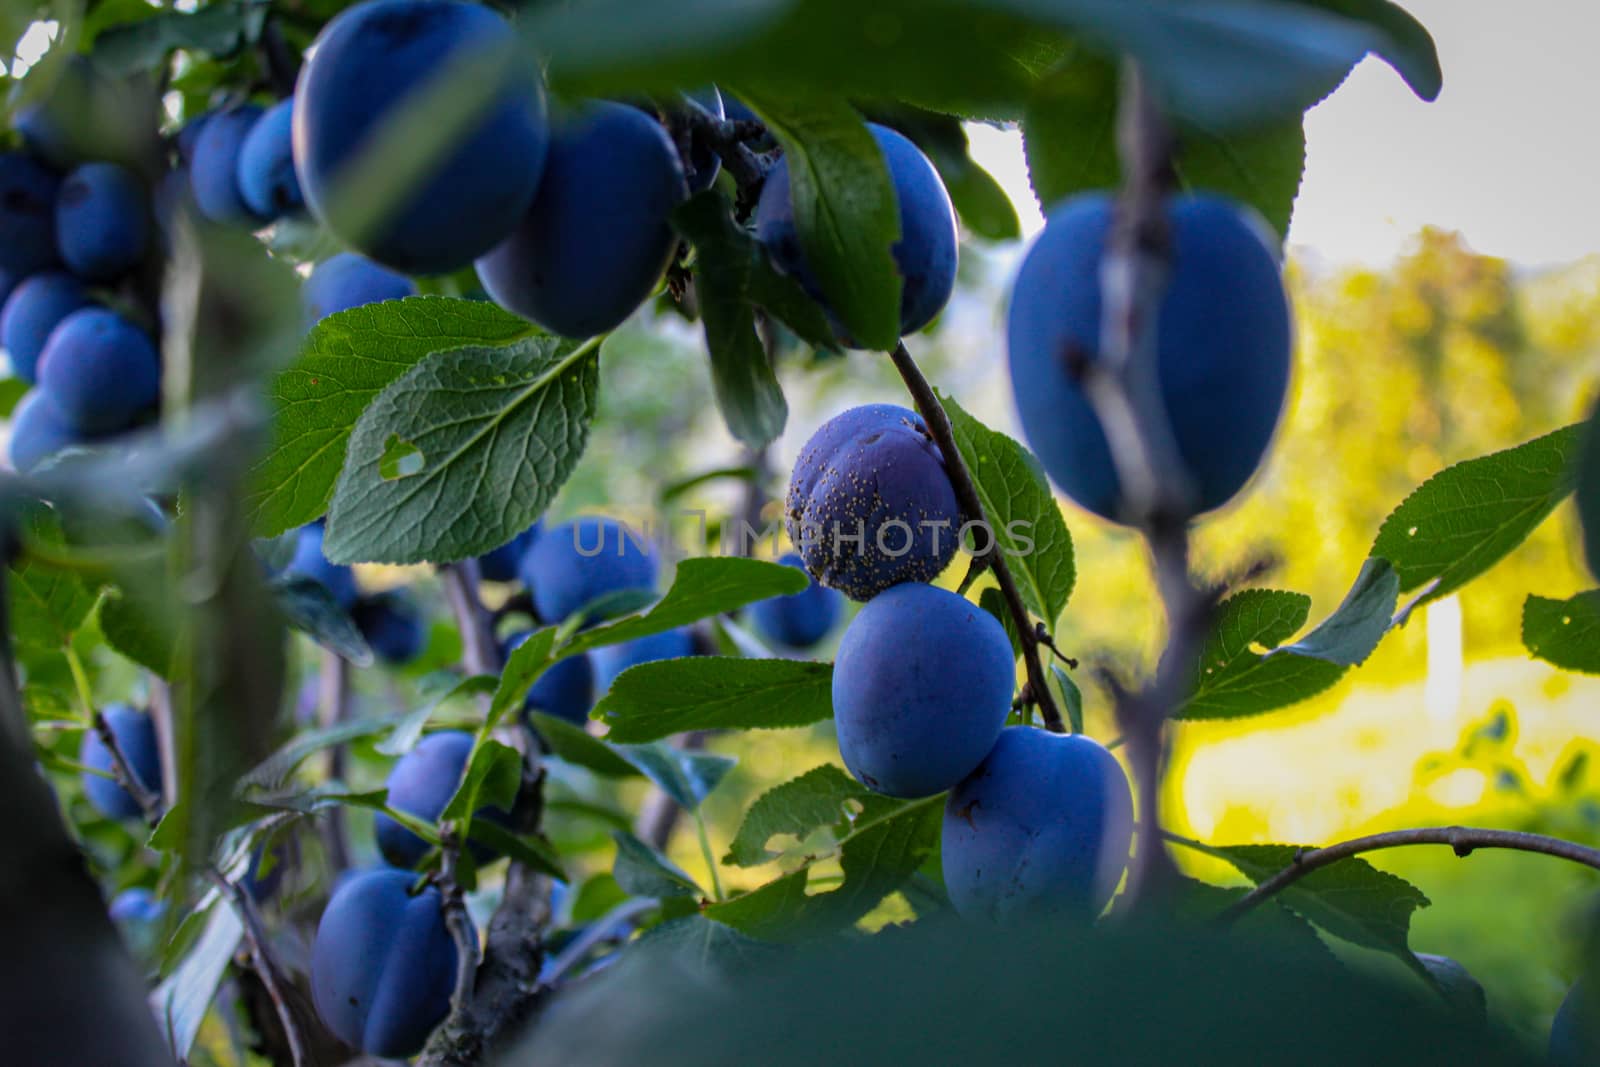 Ripe plums among the leaves. Among the plums there is one that is rotten, the plum has fungi on it. by mahirrov